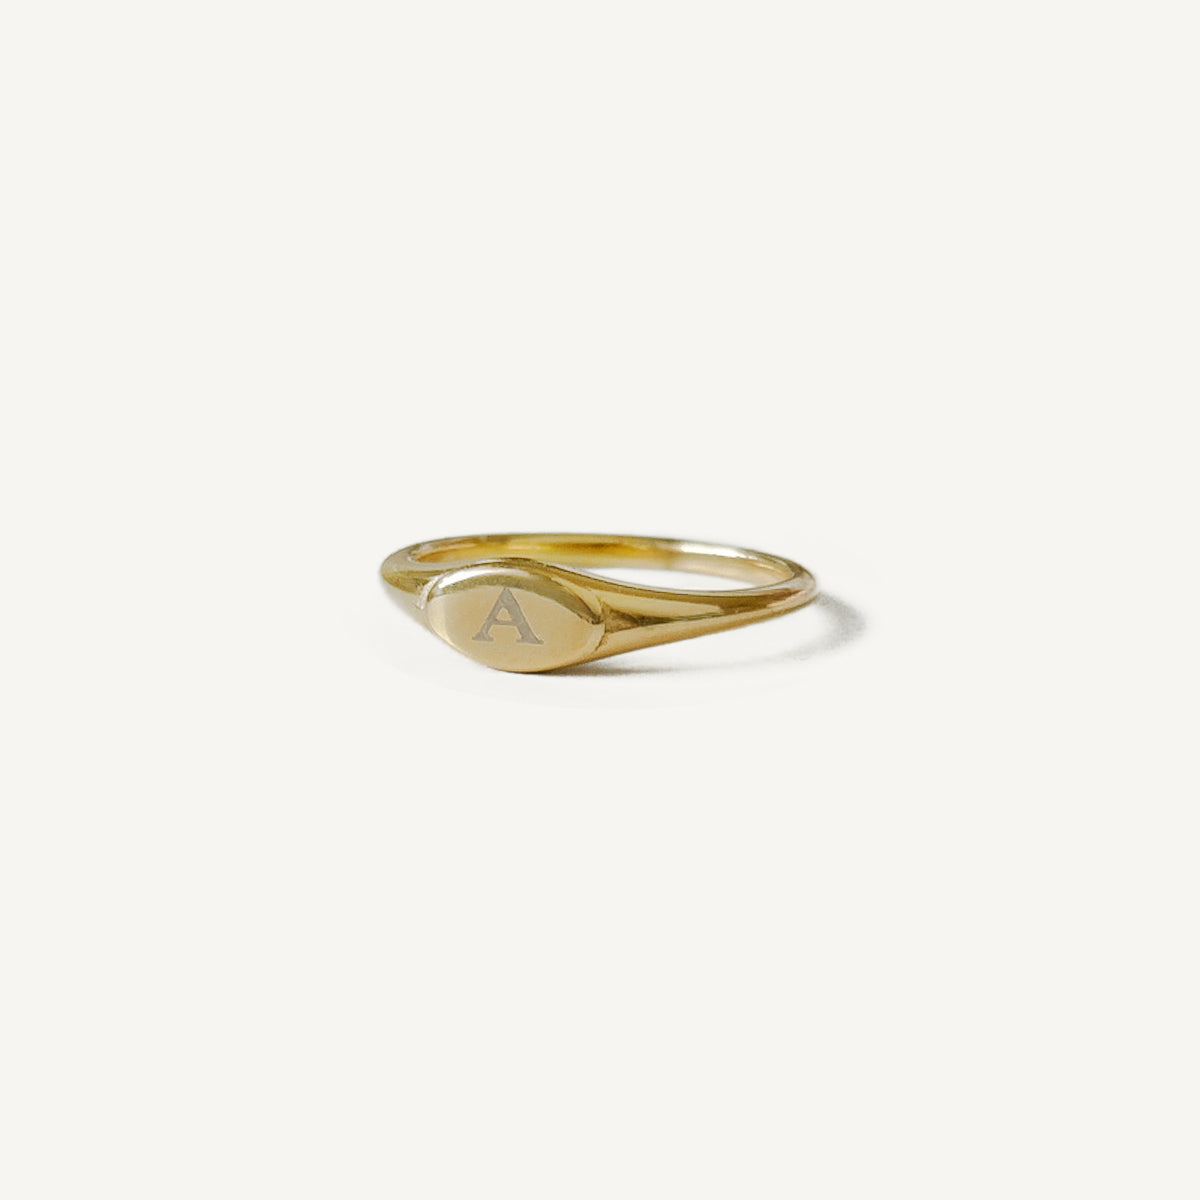 The Engraved Minimal Oval Signet Ring